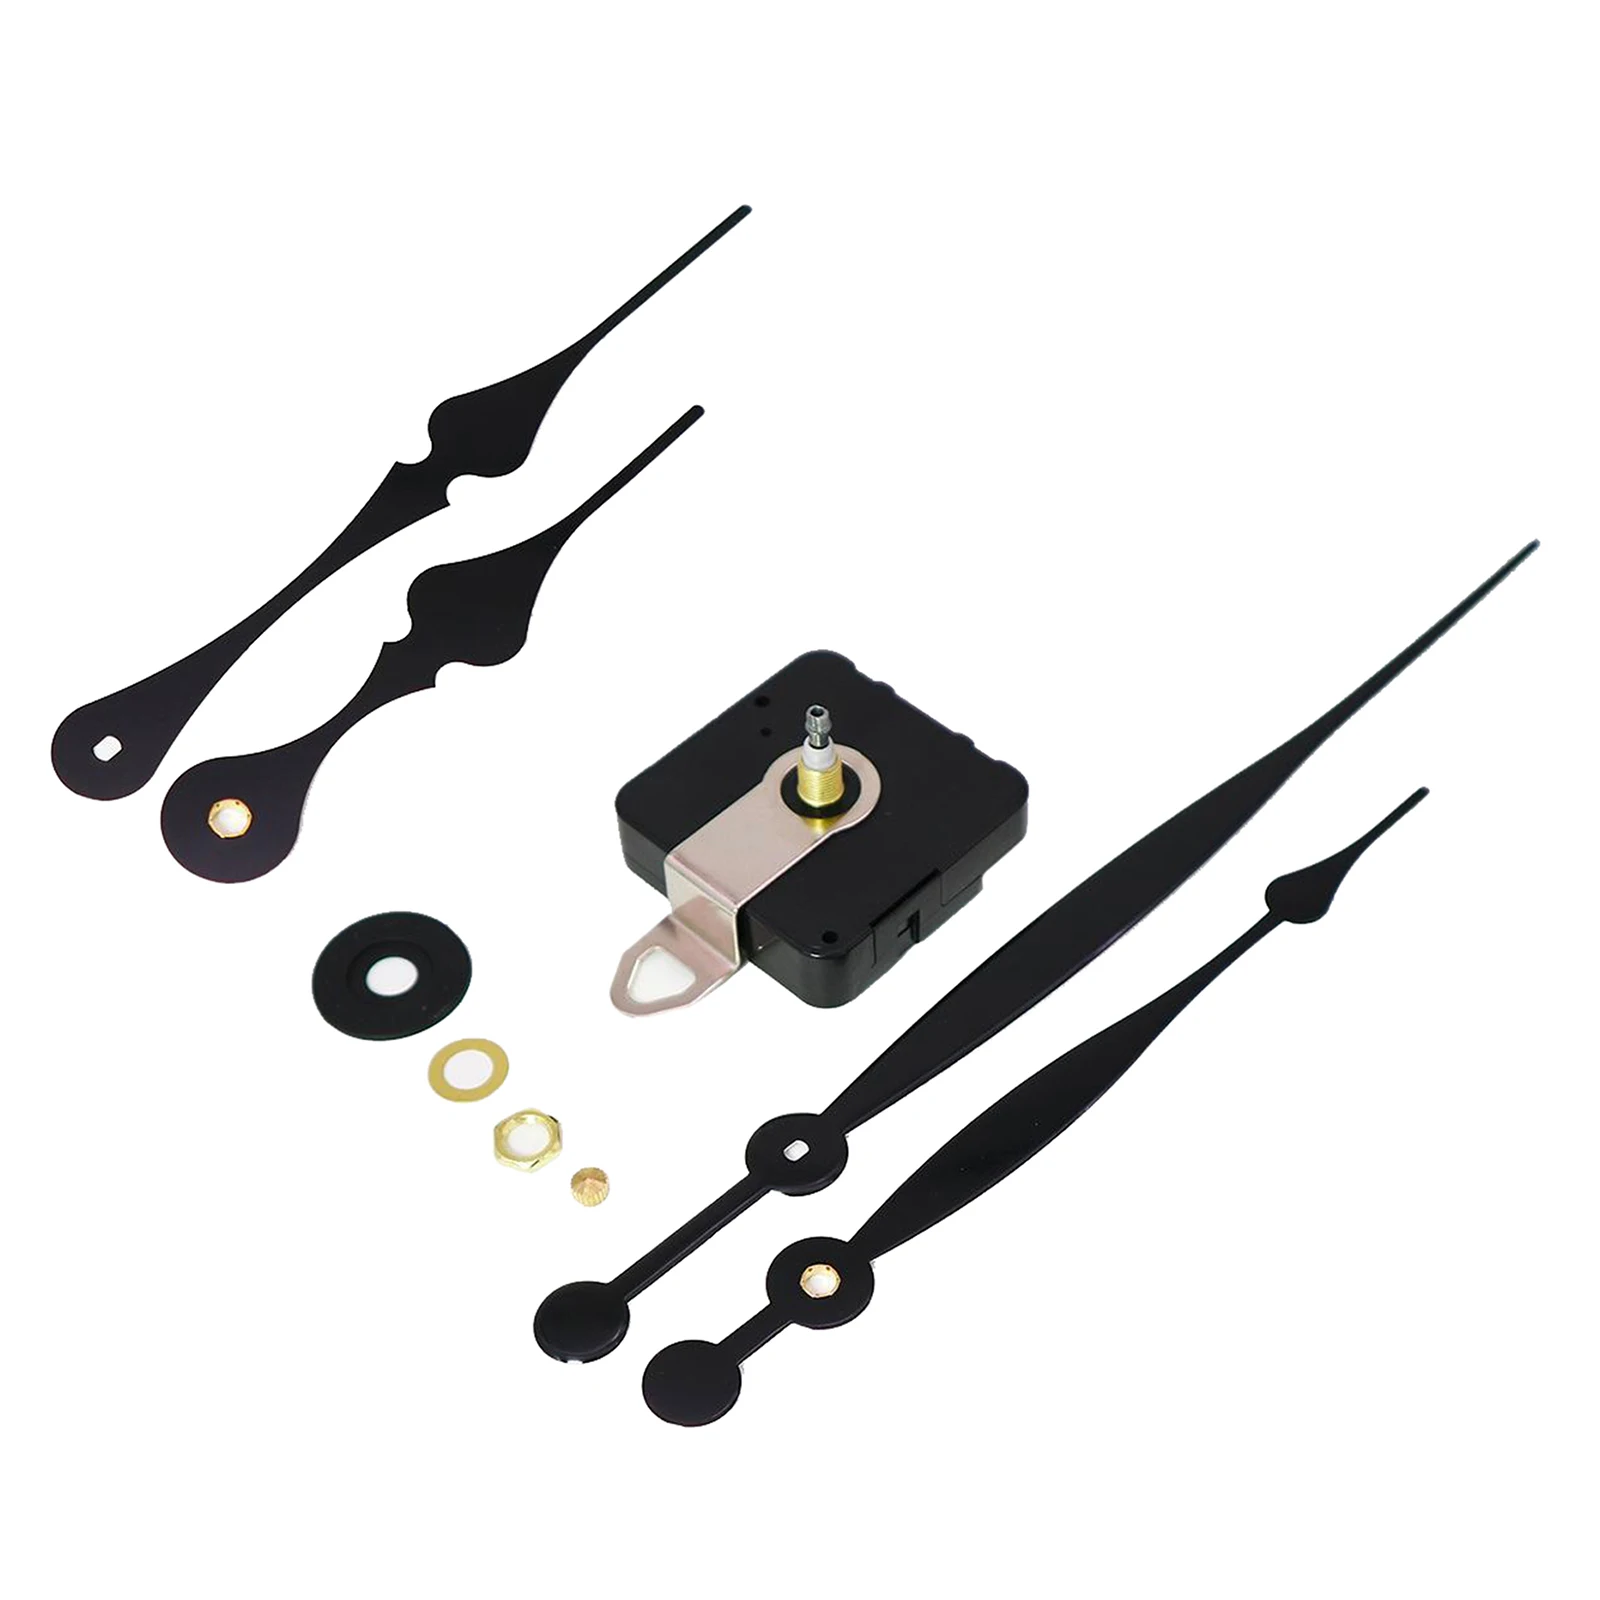 DIY Wall Clock Movement Mechanism Repair Parts 20mm Shaft Non-Ticking, Durable Material, 5mm Max Dial Thickness